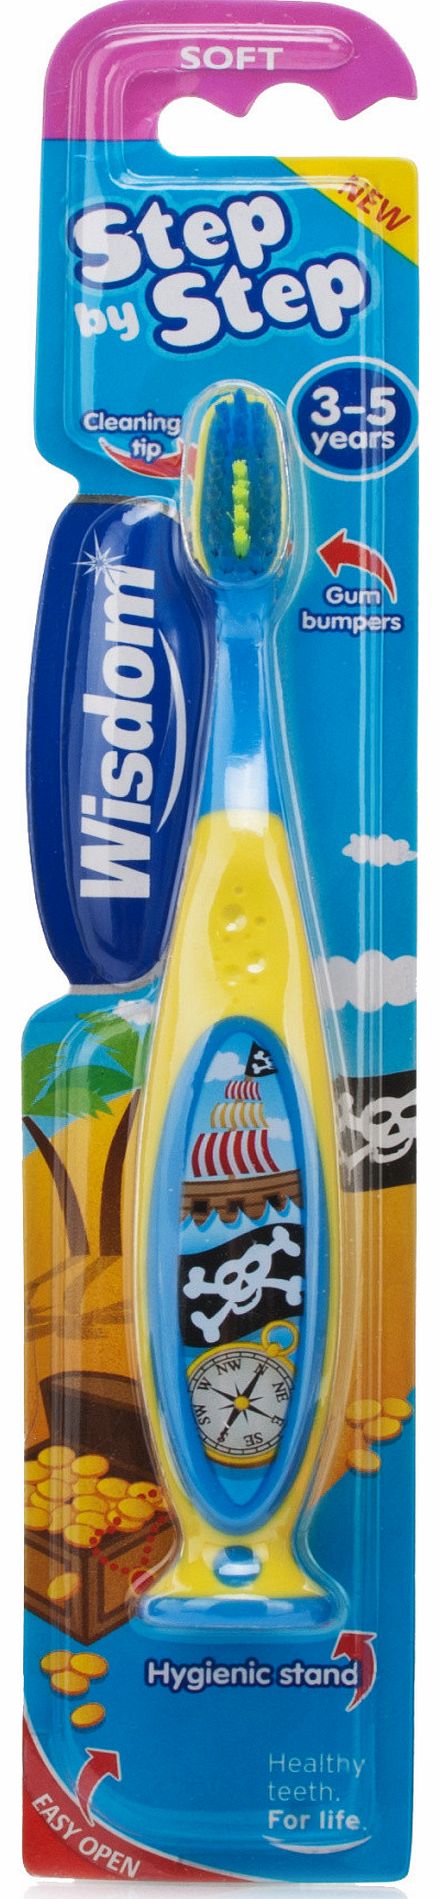 Wisdom Step by Step Tooth Brush for Boys 3-5yrs